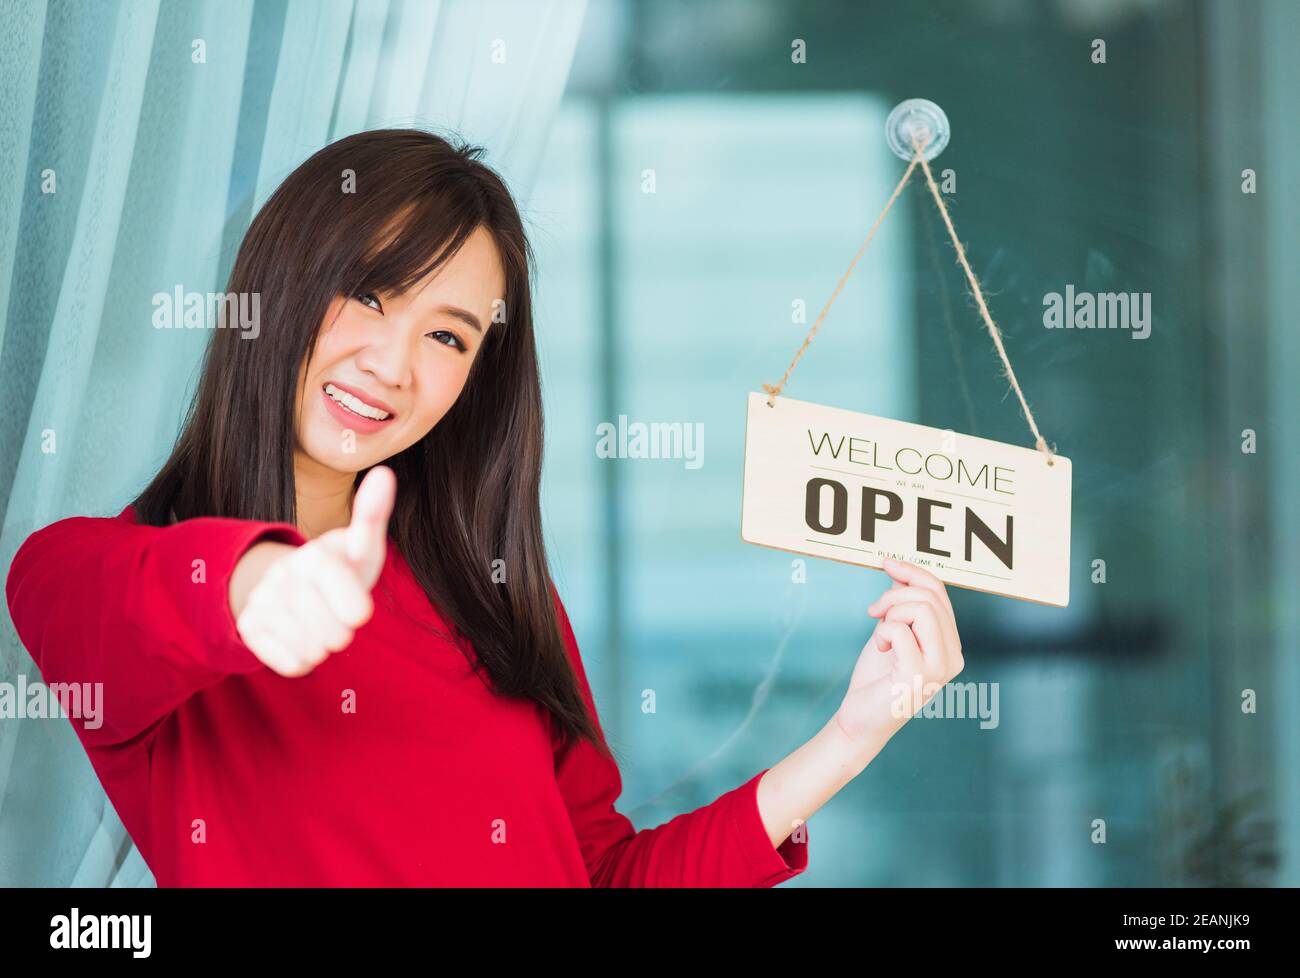 Woman smile show finger thumb up for good sign she notice sign wood board label 'WELCOME OPEN' hang through glass door front shop Stock Photo